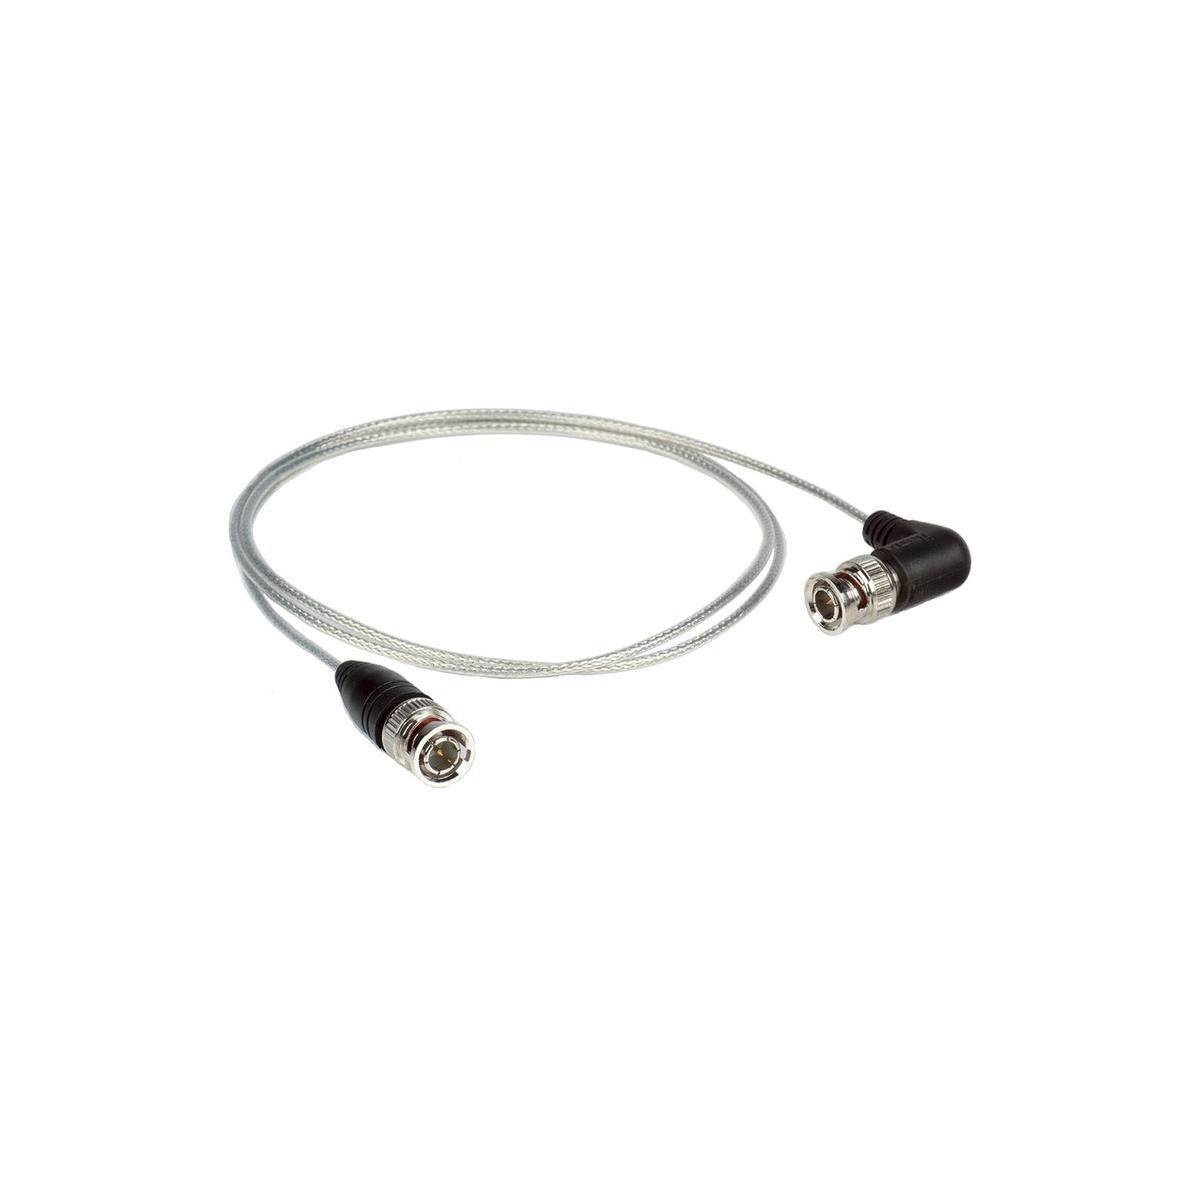 Image of Ikan 3' Ultra Slim SDI Cable with BNC to Right-Angle BNC Connector